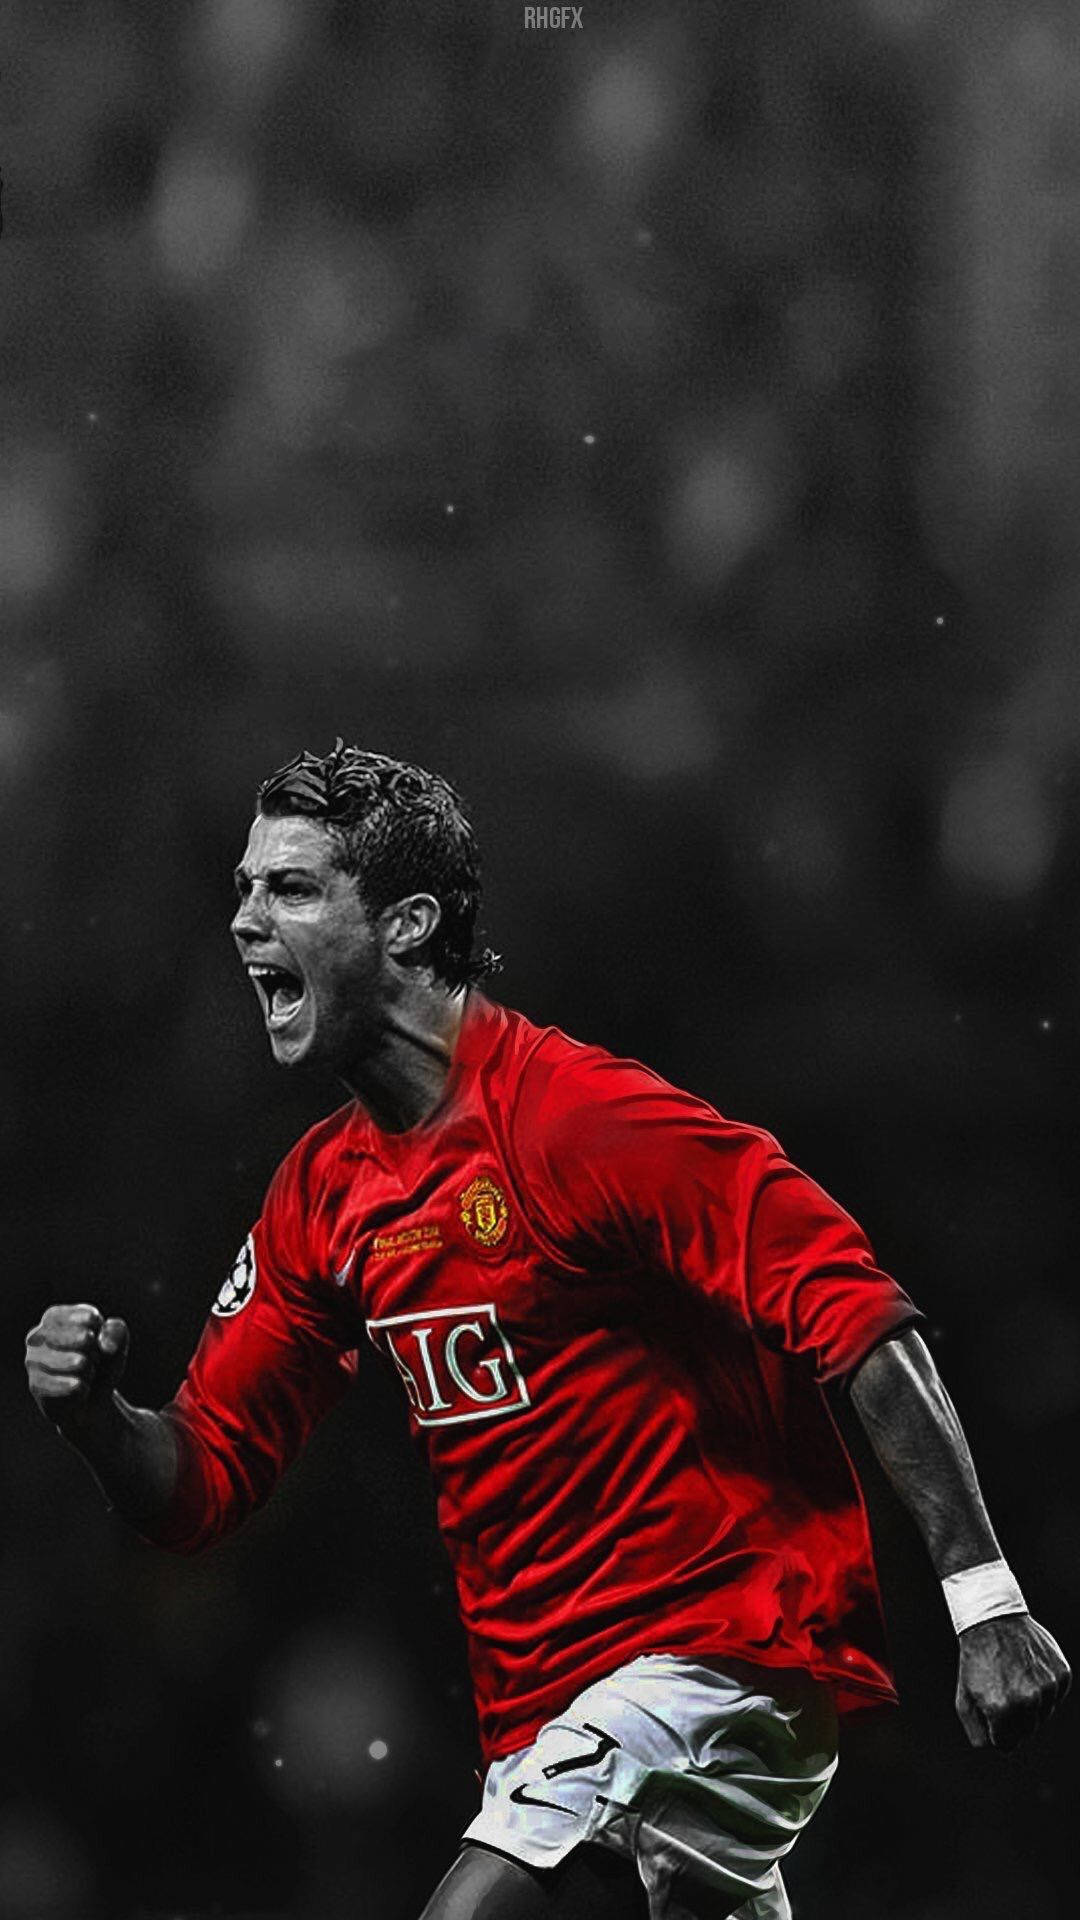 THE BEST 10 CRISTIANO RONALDO WALLPAPERS HD PORTUGAL PHOTOS